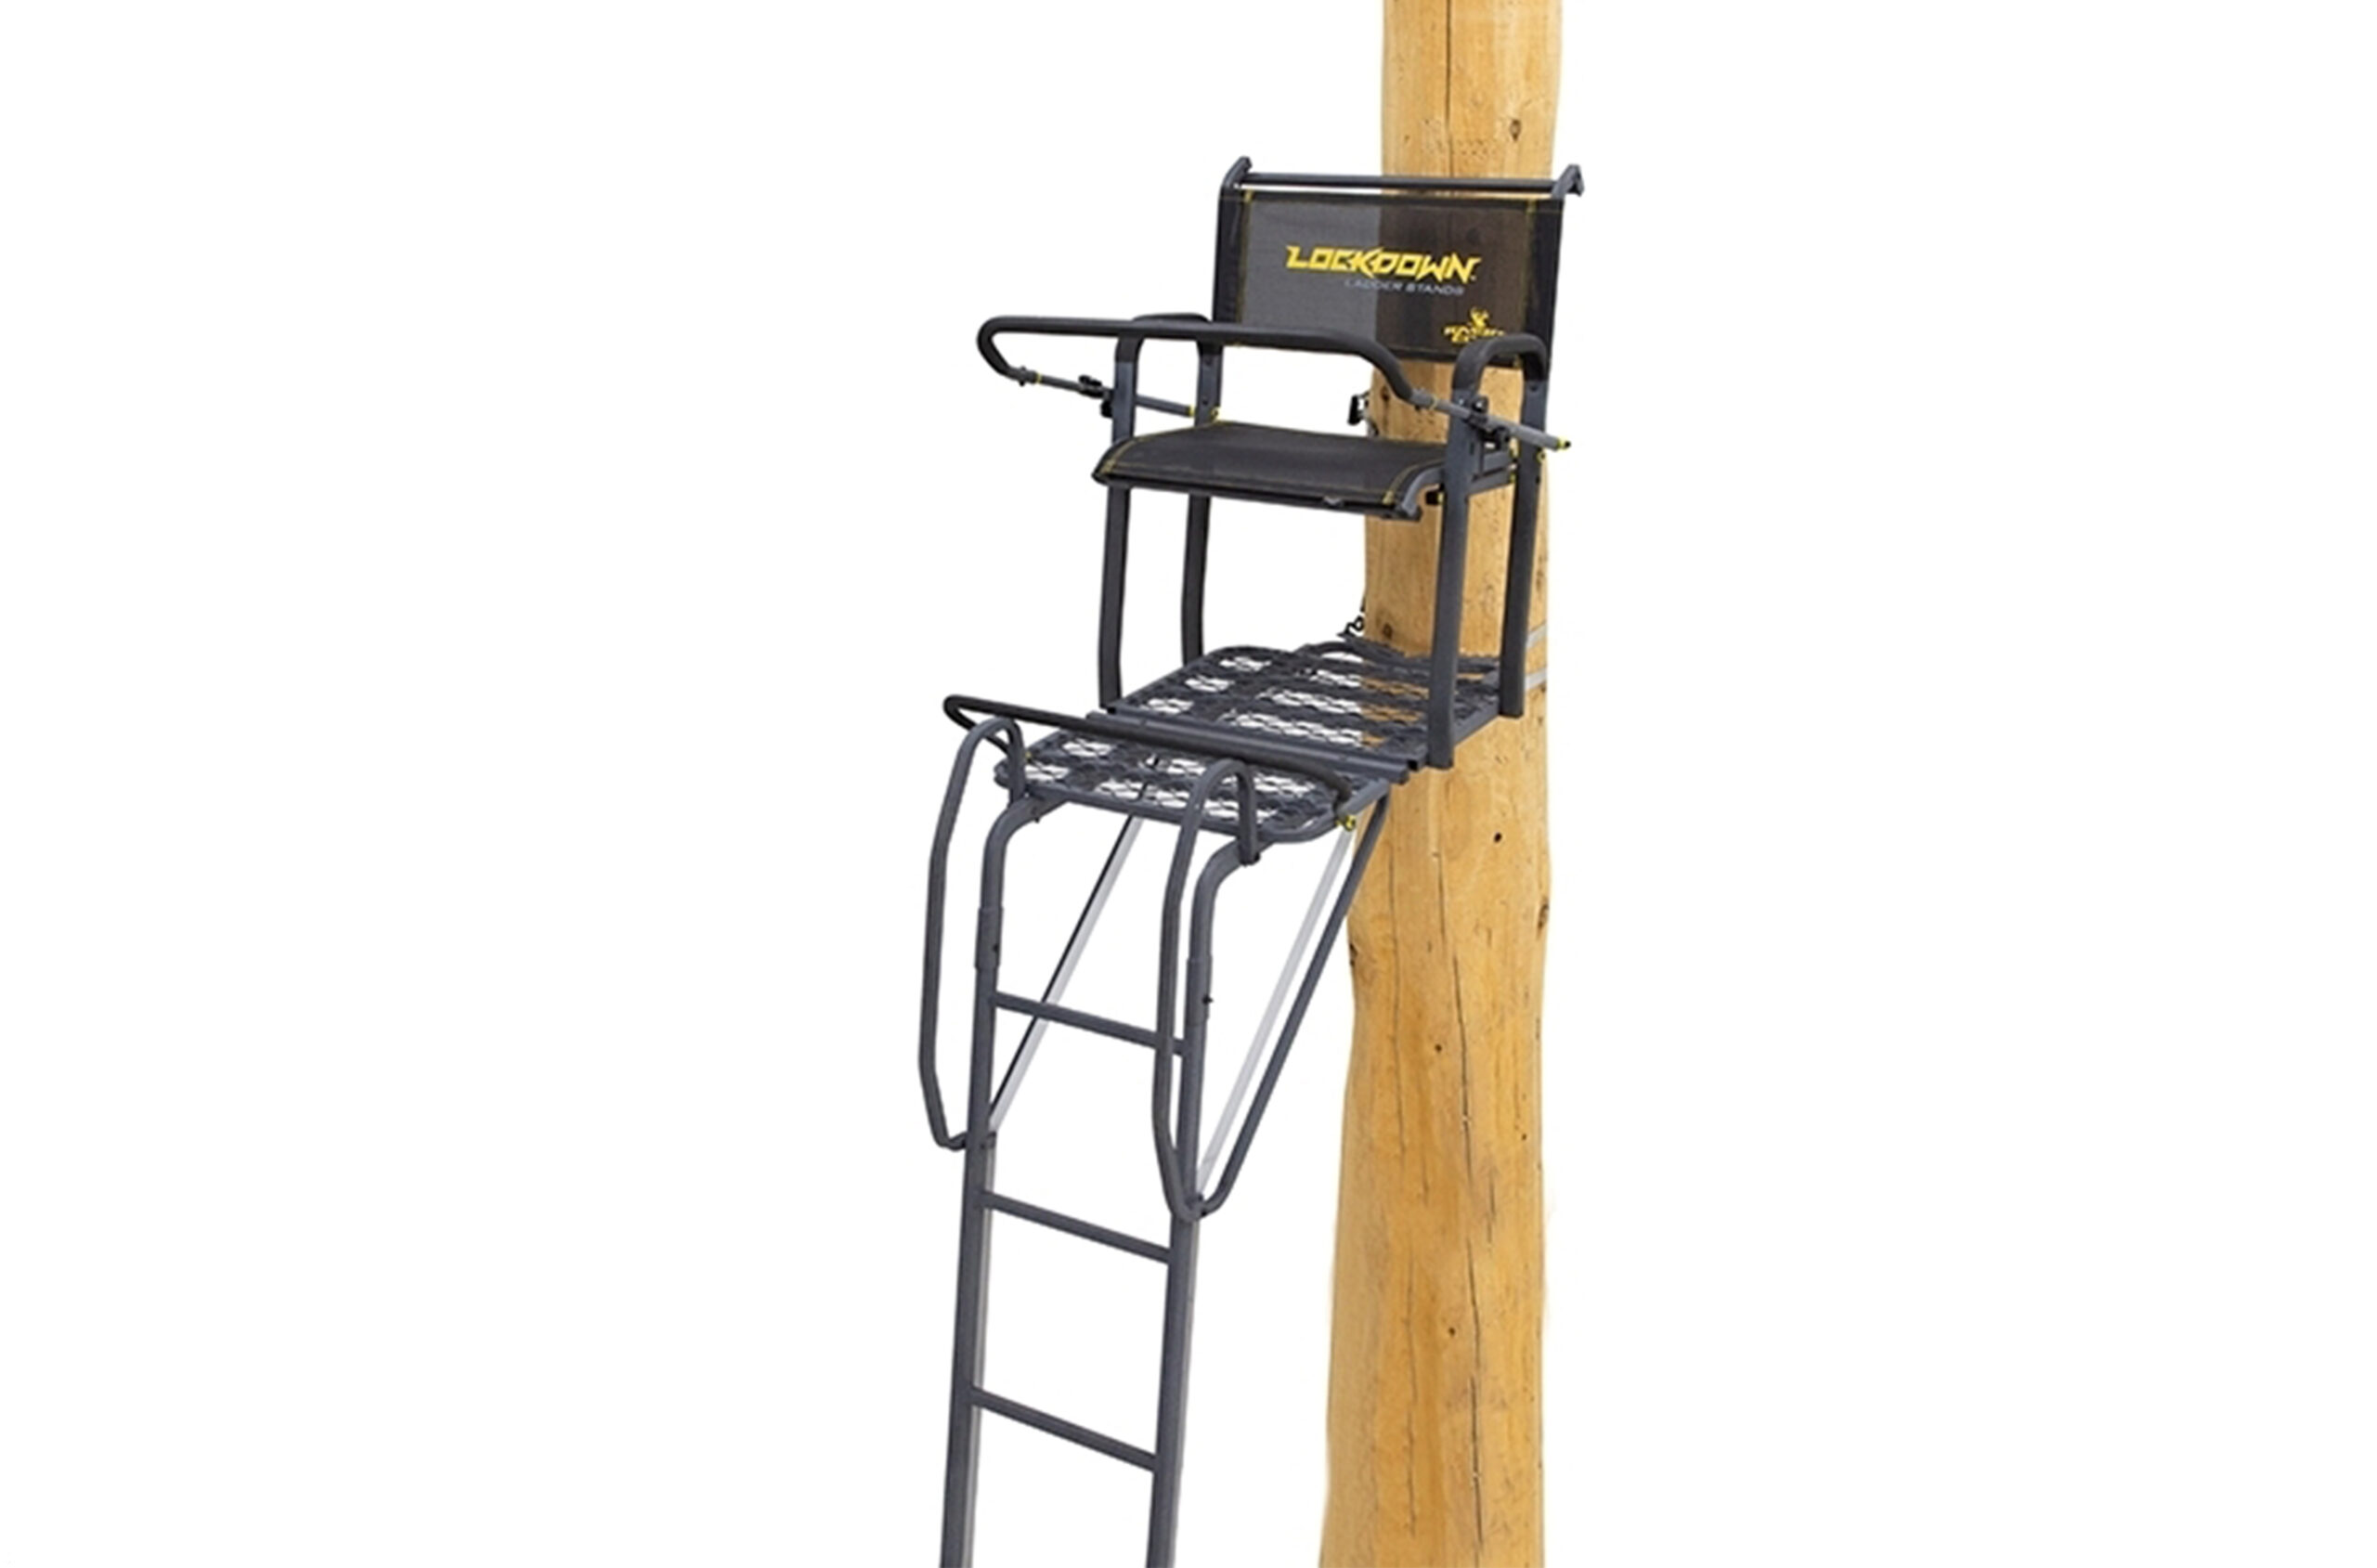 Rivers Edge Lockdown Wide 1 Man Treestand scaled 18 New Treestands and Blinds for 2022